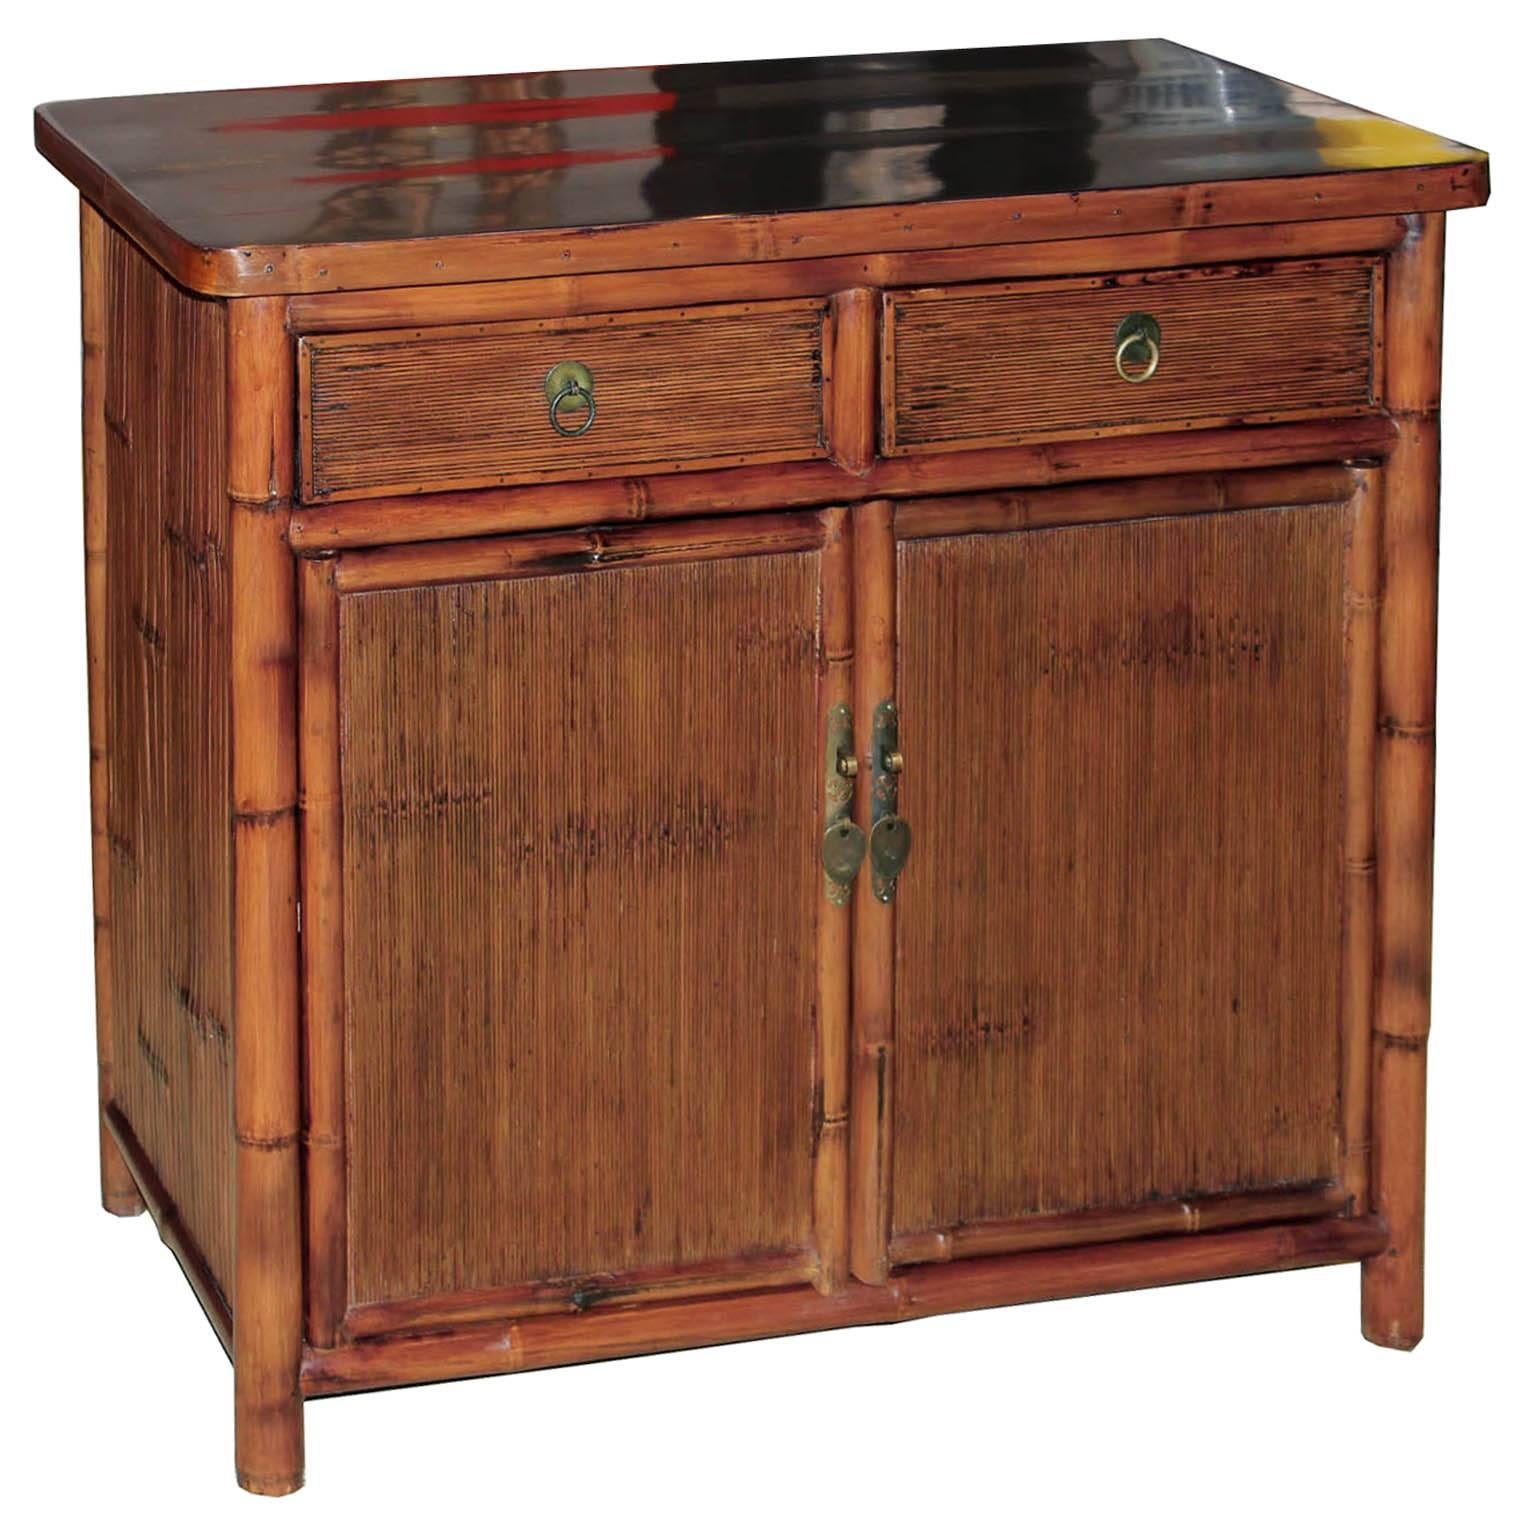 Contemporary two-drawer bamboo side chest made from split bamboo. Place next to a sofa or armchair or use as a bedside chest.